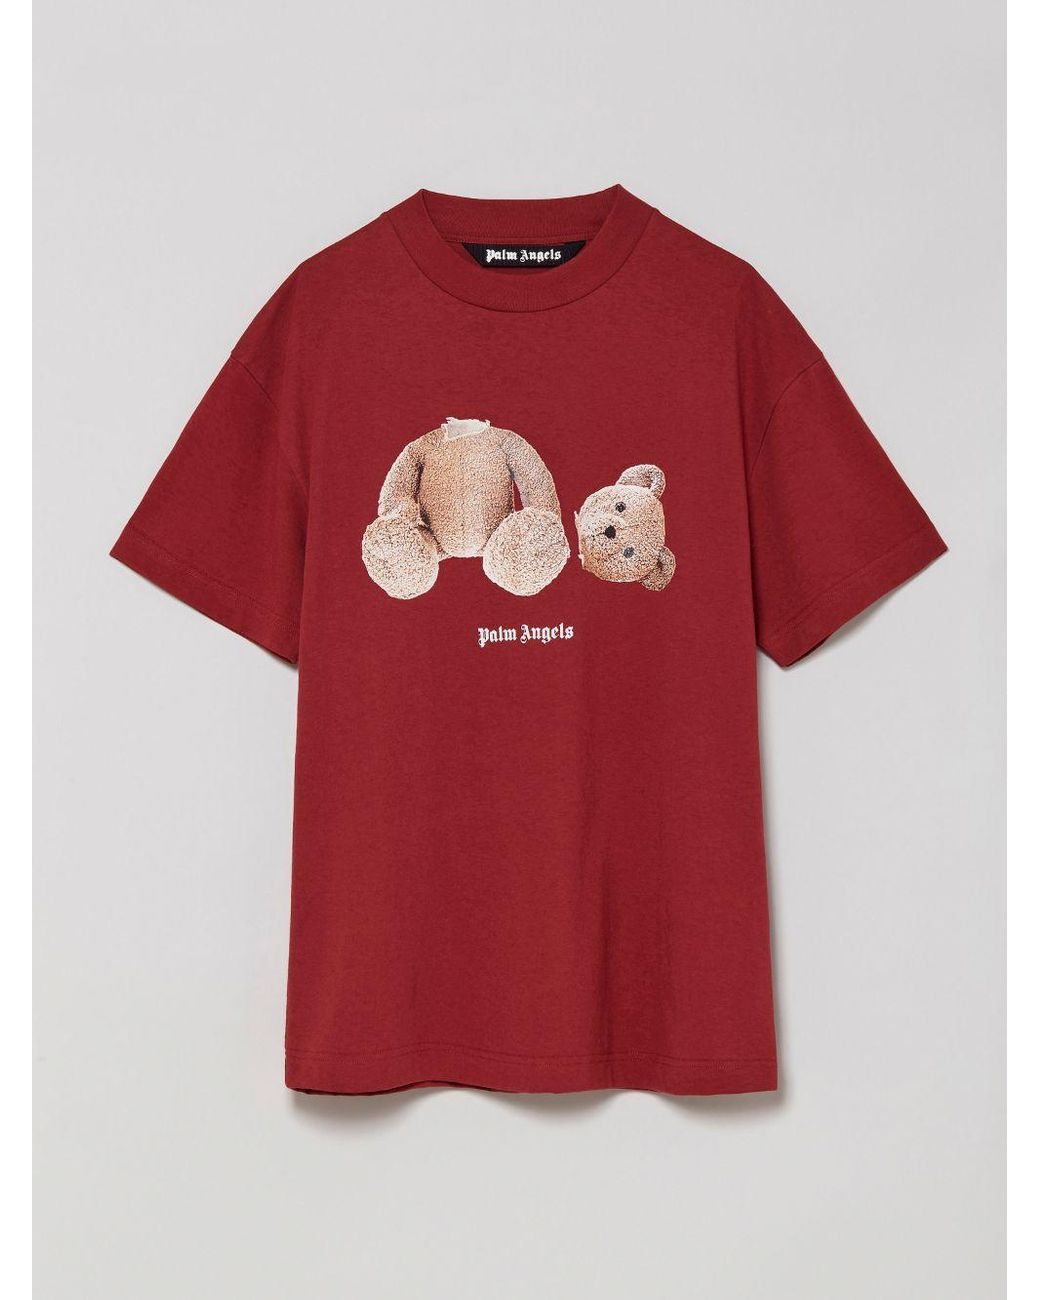 Palm Angels Cotton Bear Print T-shirt in Red for Men - Lyst